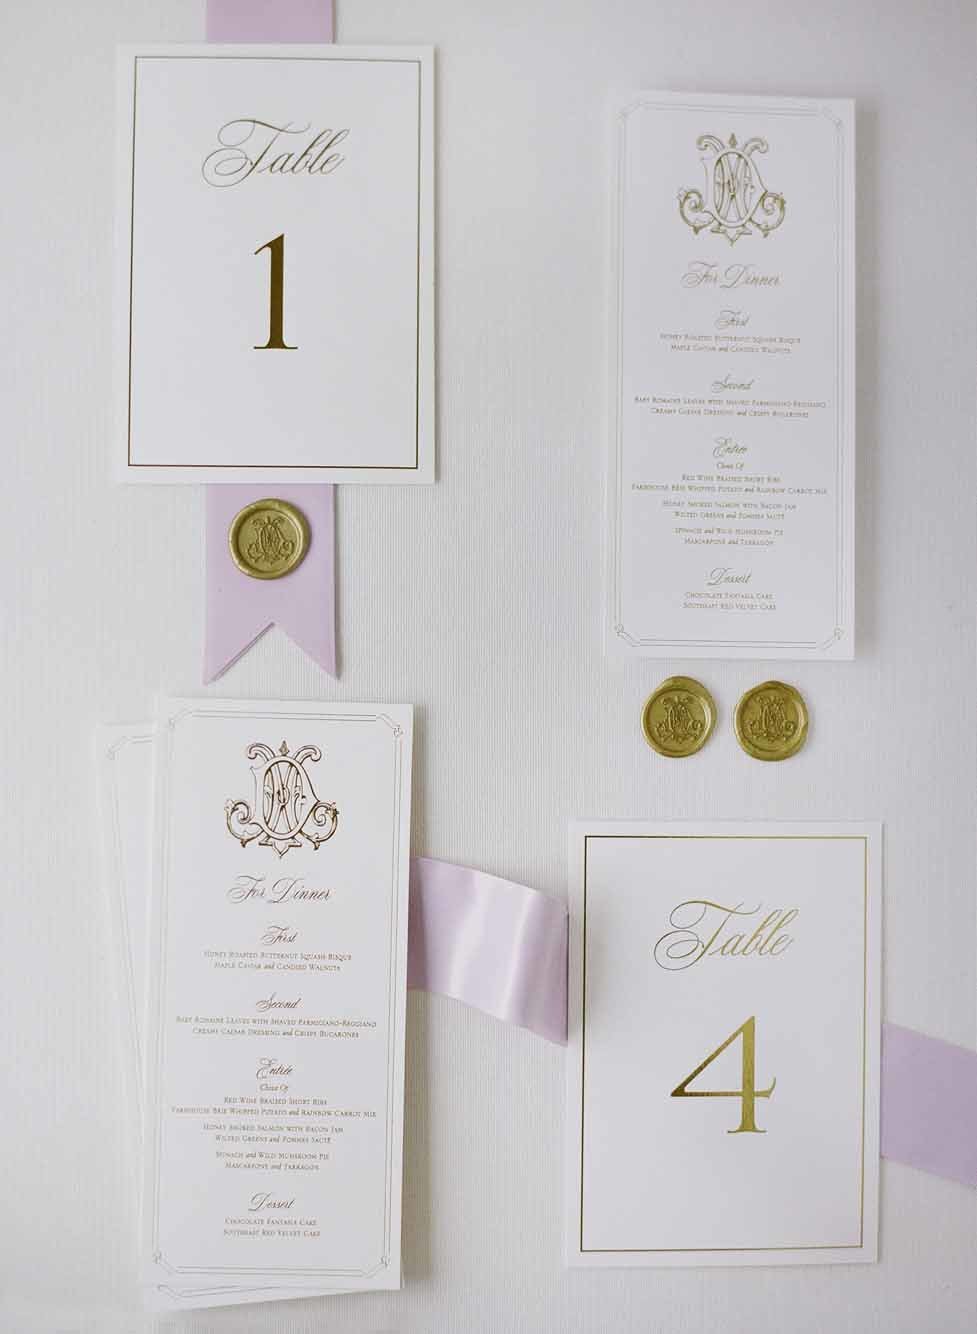 Beautiful wedding invitation suite flat-lay  with gold and purple accents.